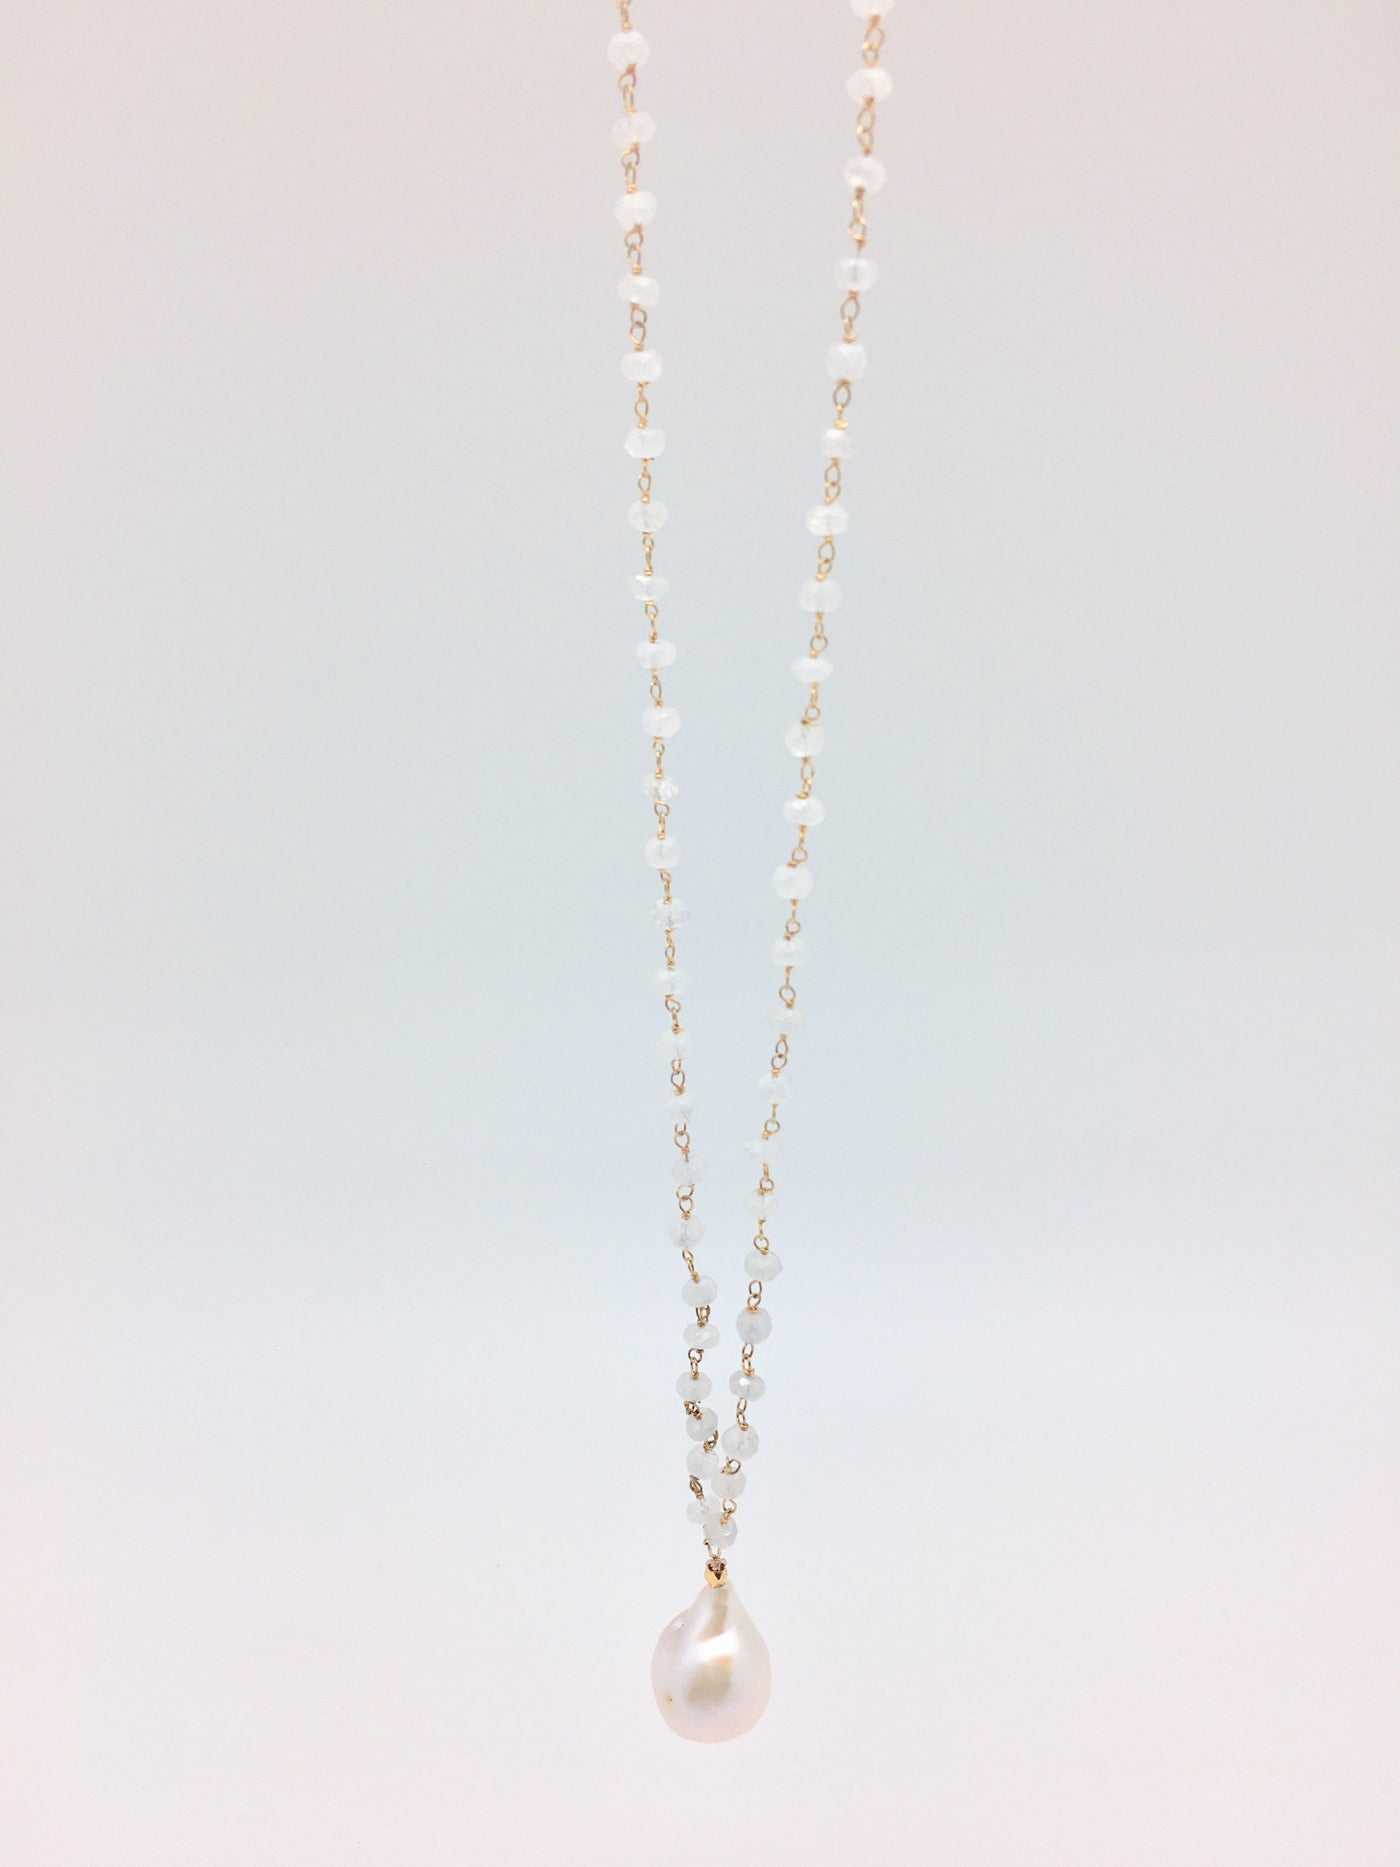 Diddi Long Necklace - White Moonstone/White Baroque Pearl